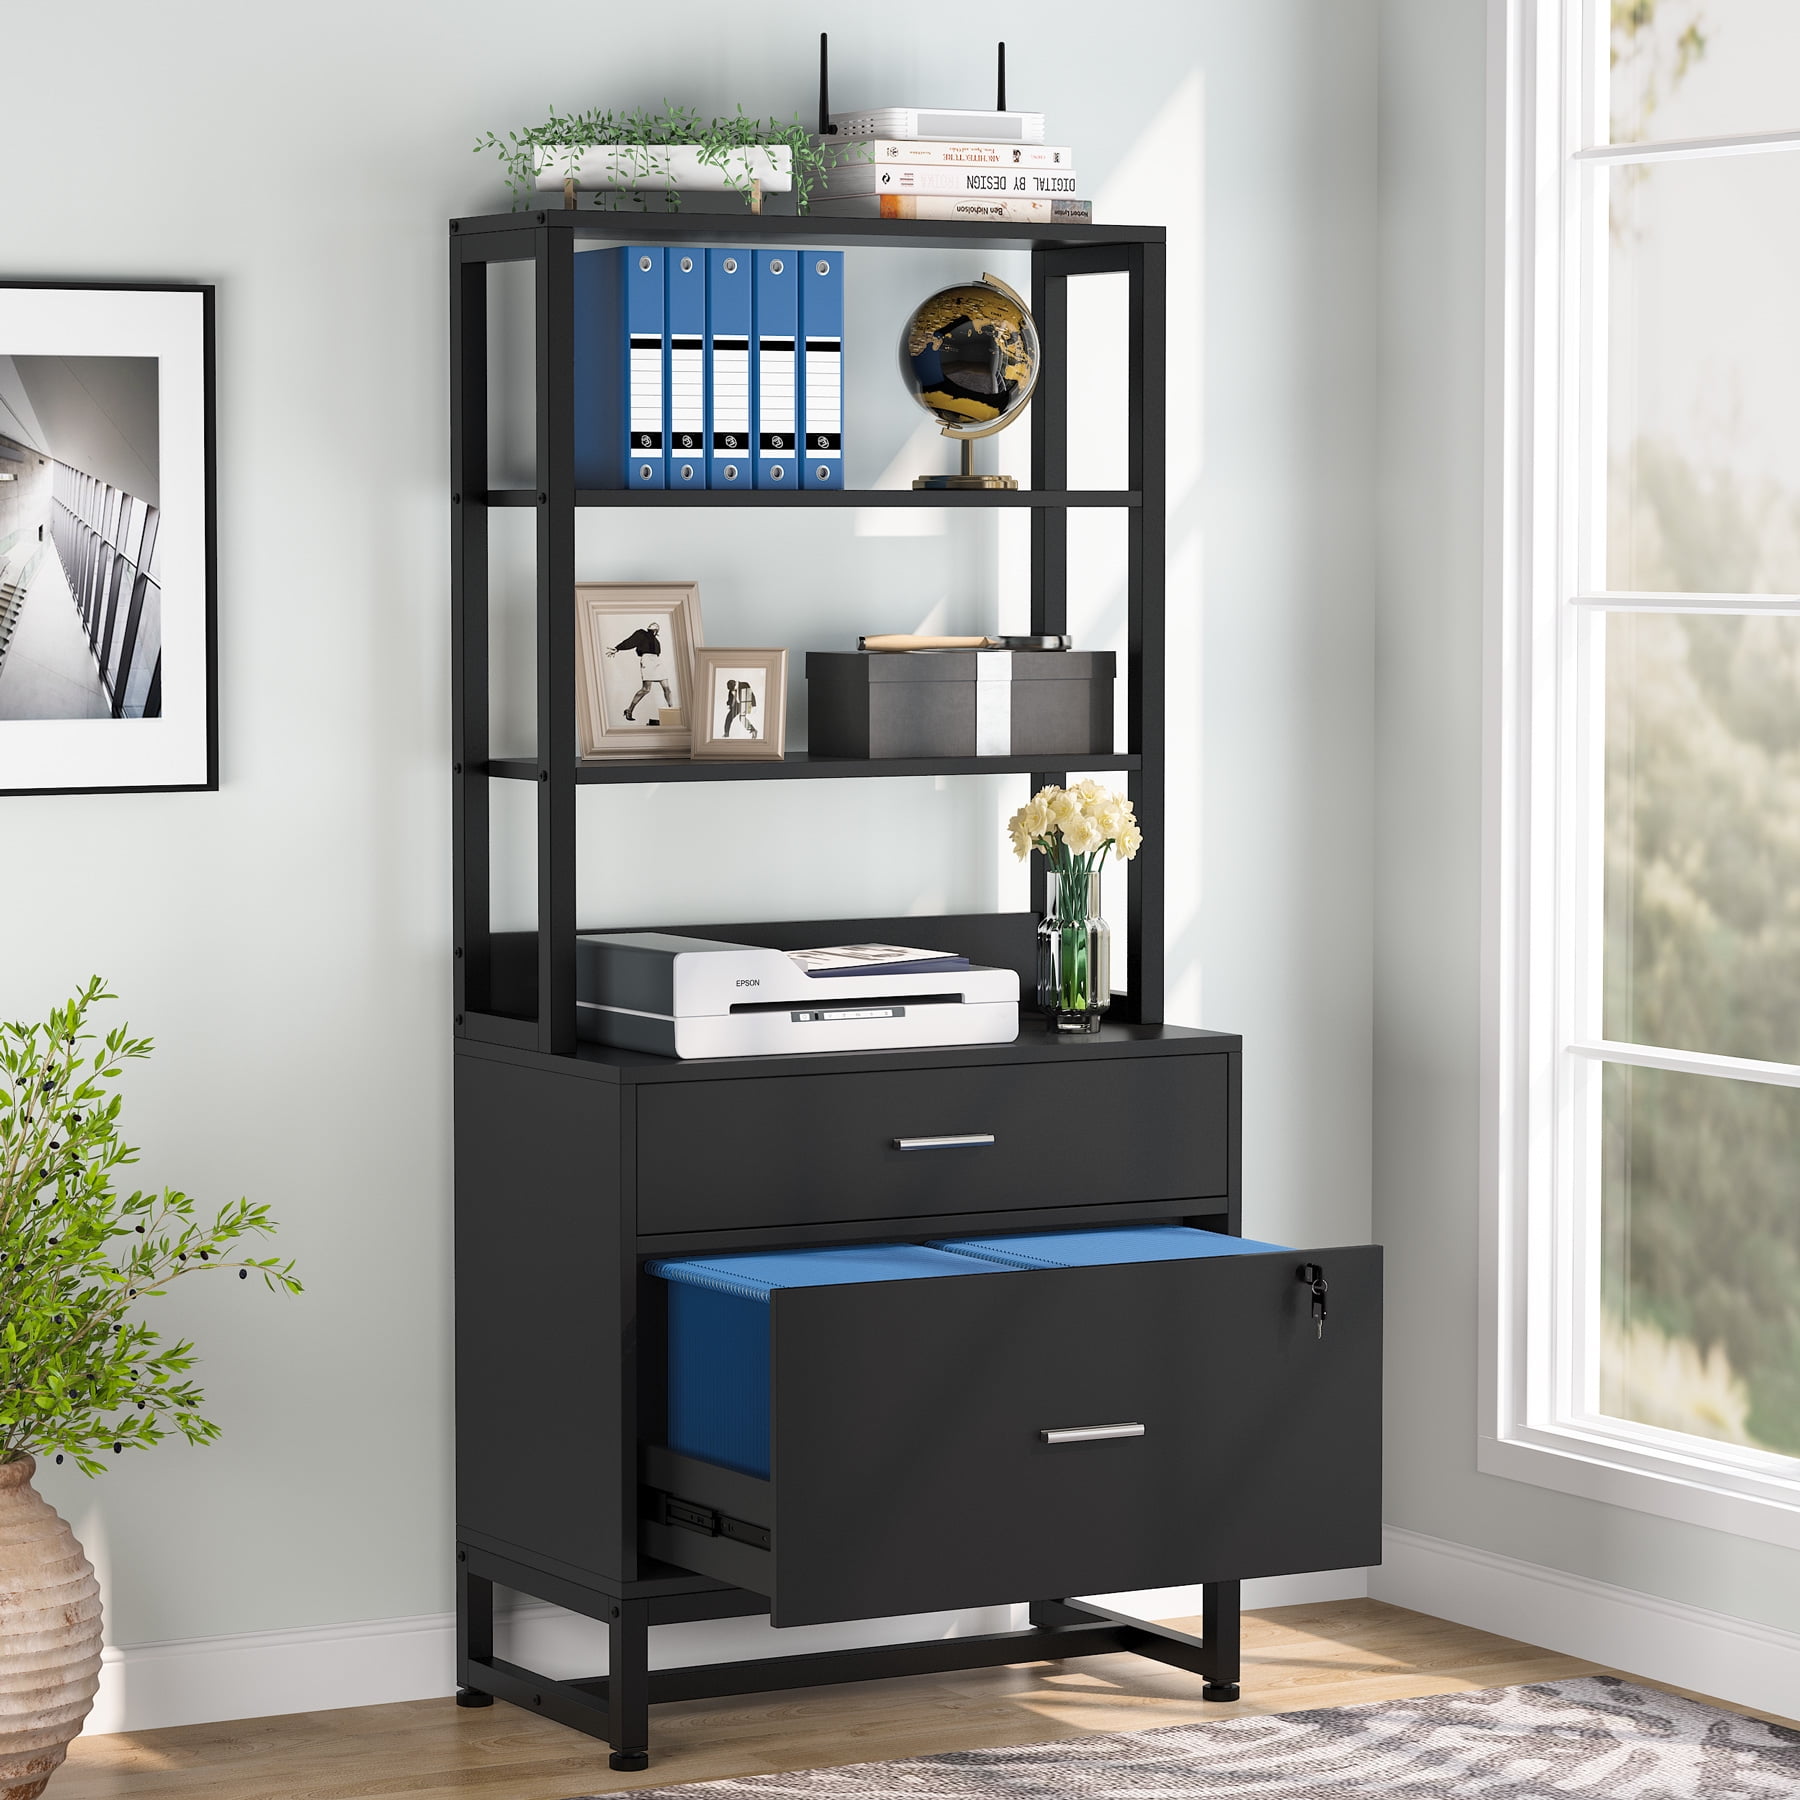 Details about   2-Drawer File Cabinet Lateral Document Organizer Storage Office Furniture Black 